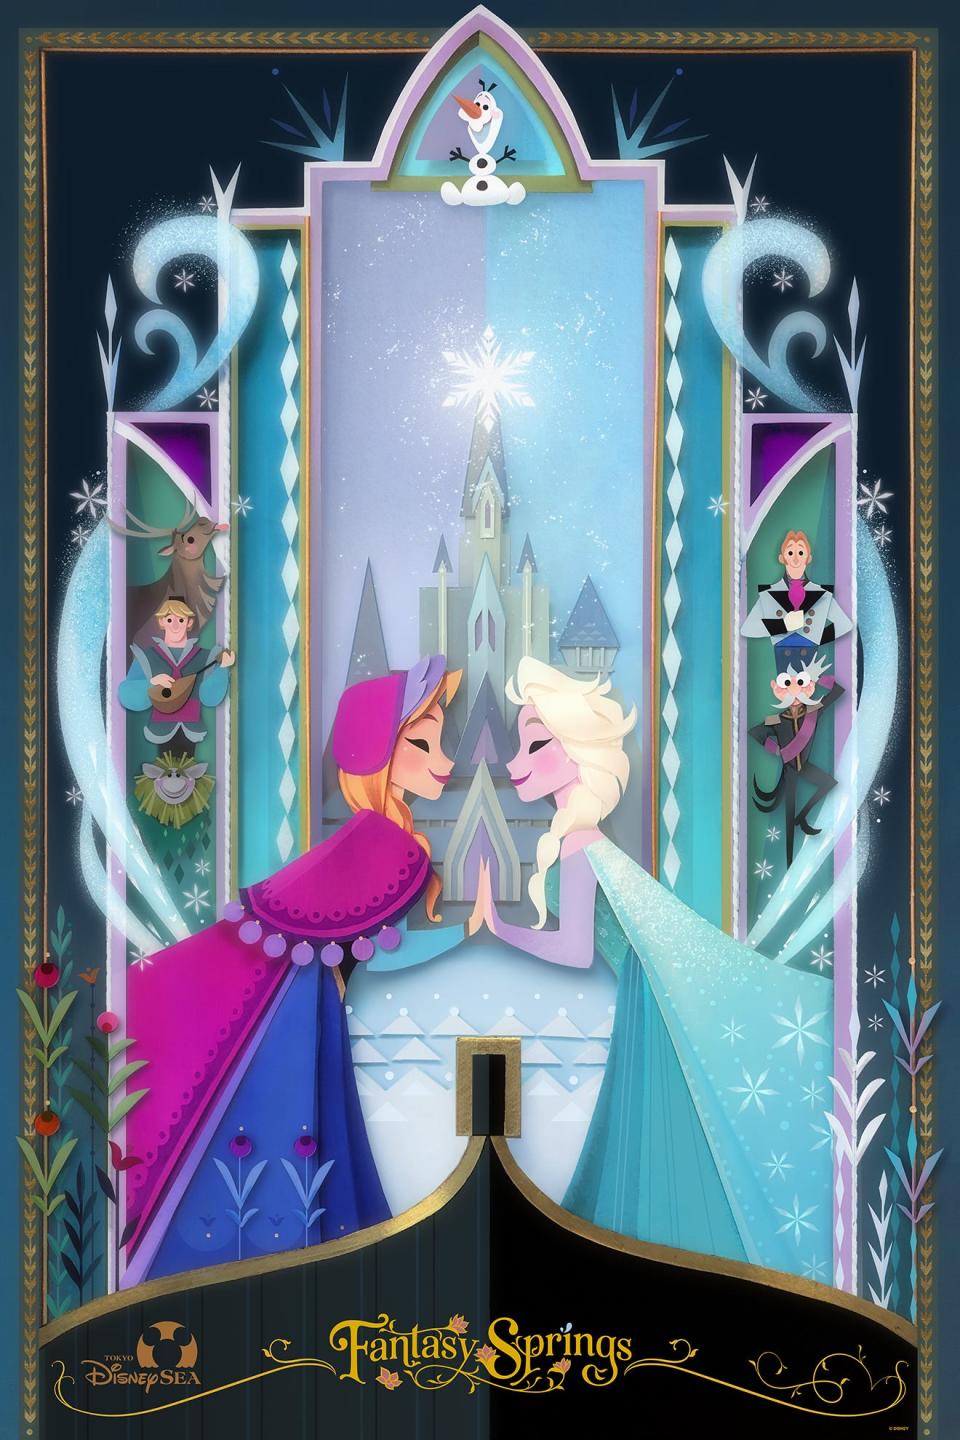 Anna and Elsa’s Frozen Journey follows the storyline of the first "Frozen" film.